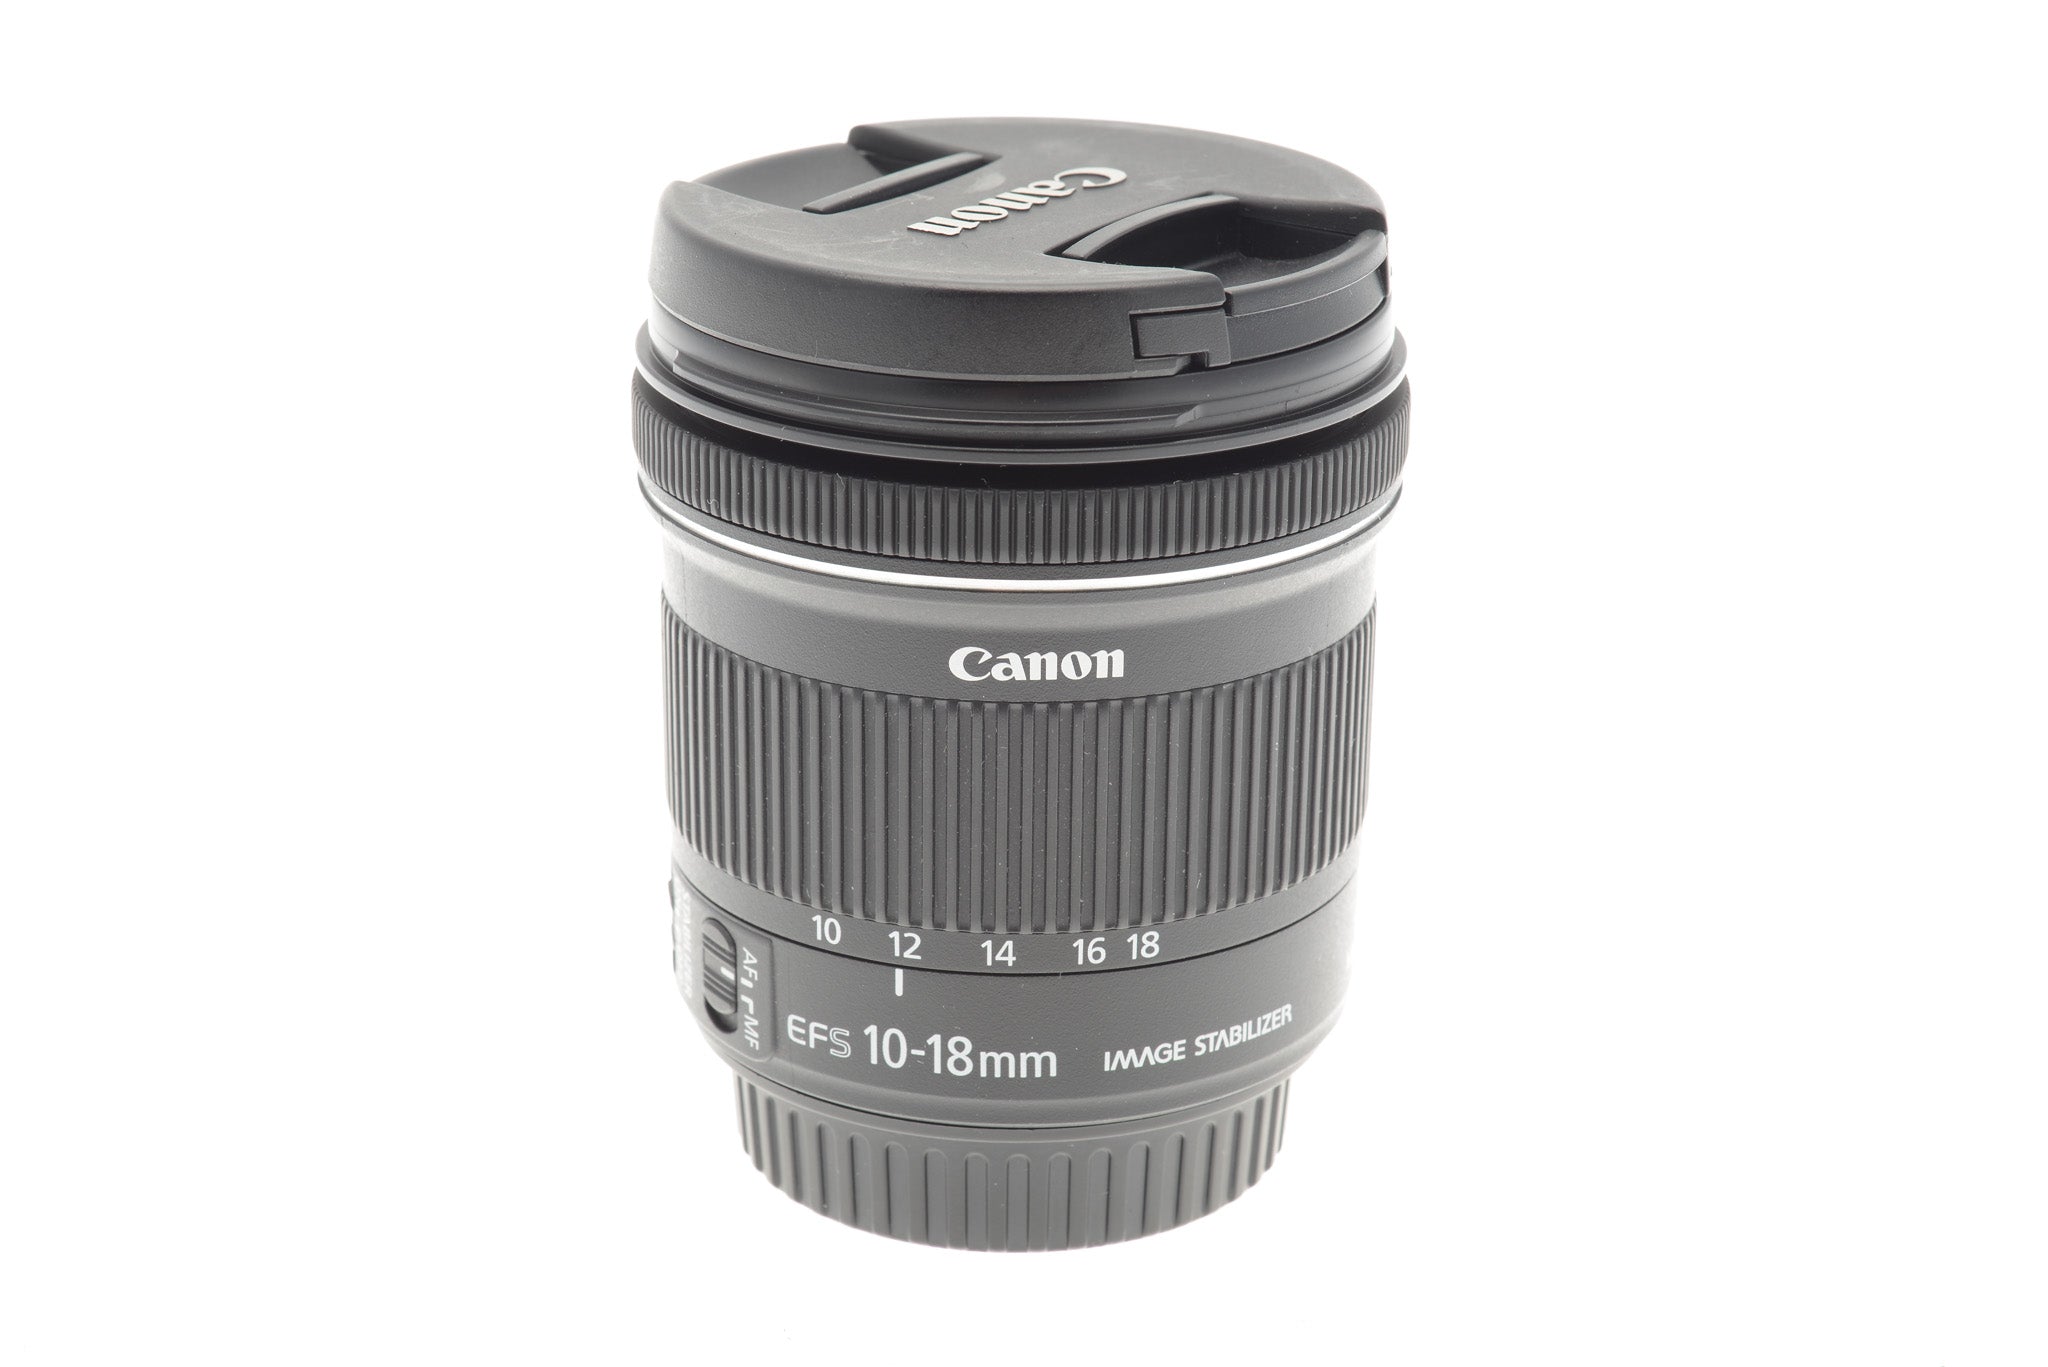 Canon 10-18mm f4.5-5.6 IS STM - Lens